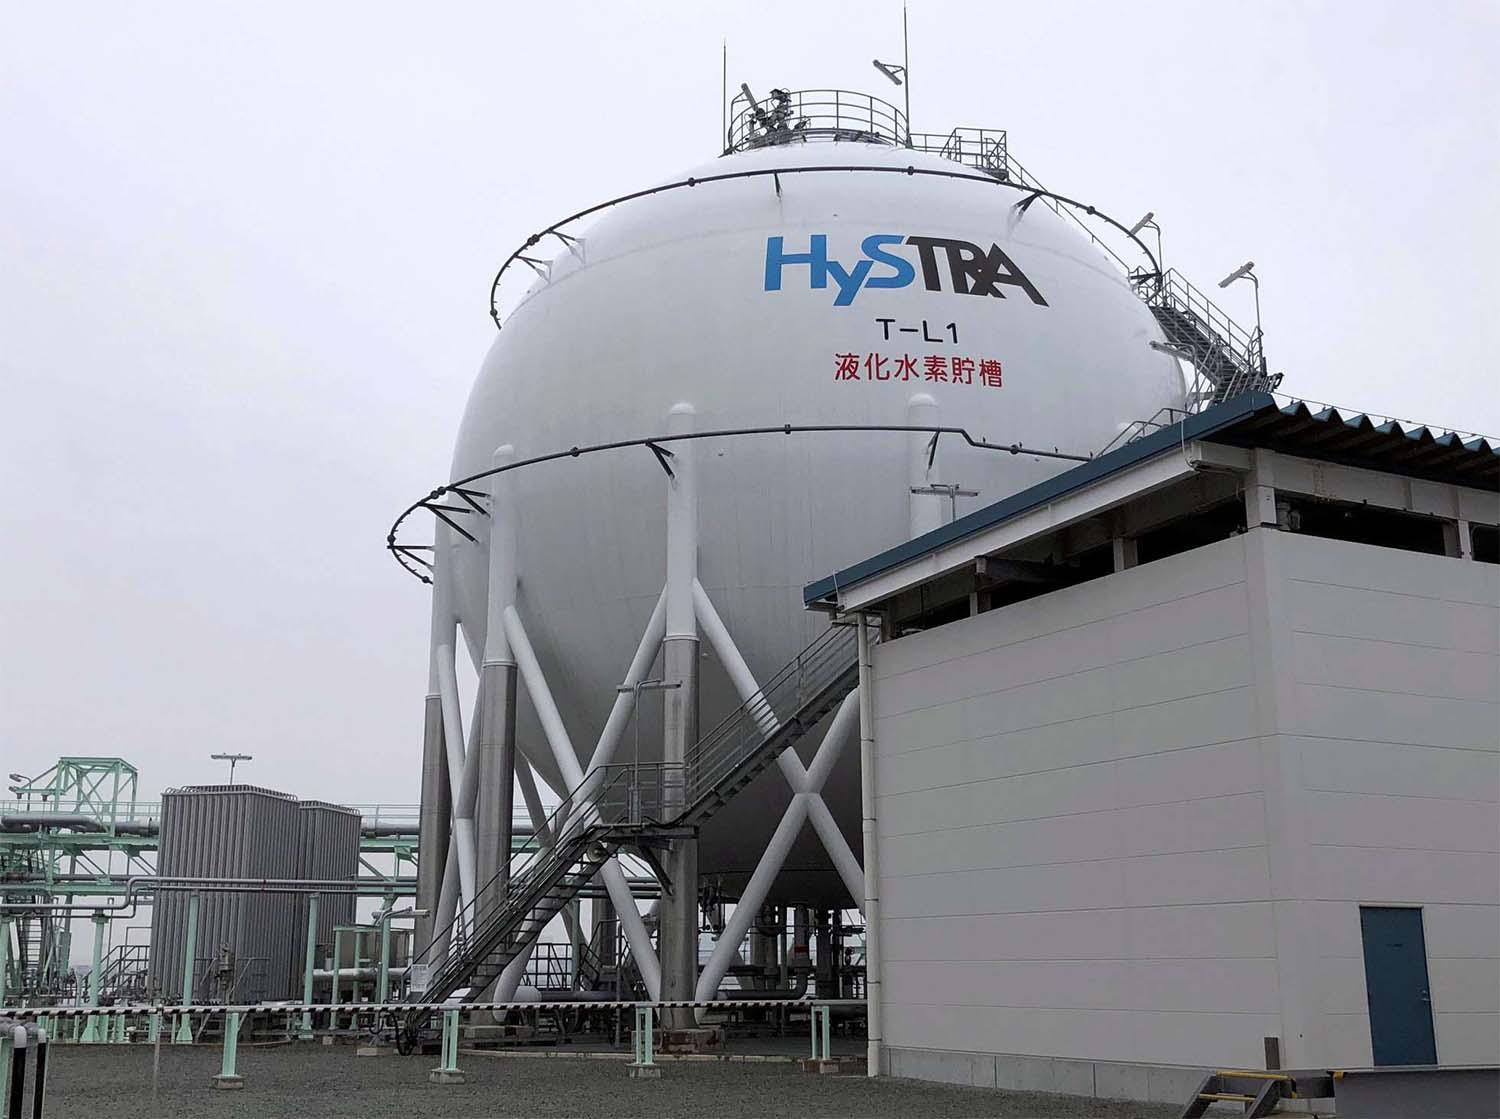 The aim of agreement is that Japan should be able to import hydrogen produced in the UAE